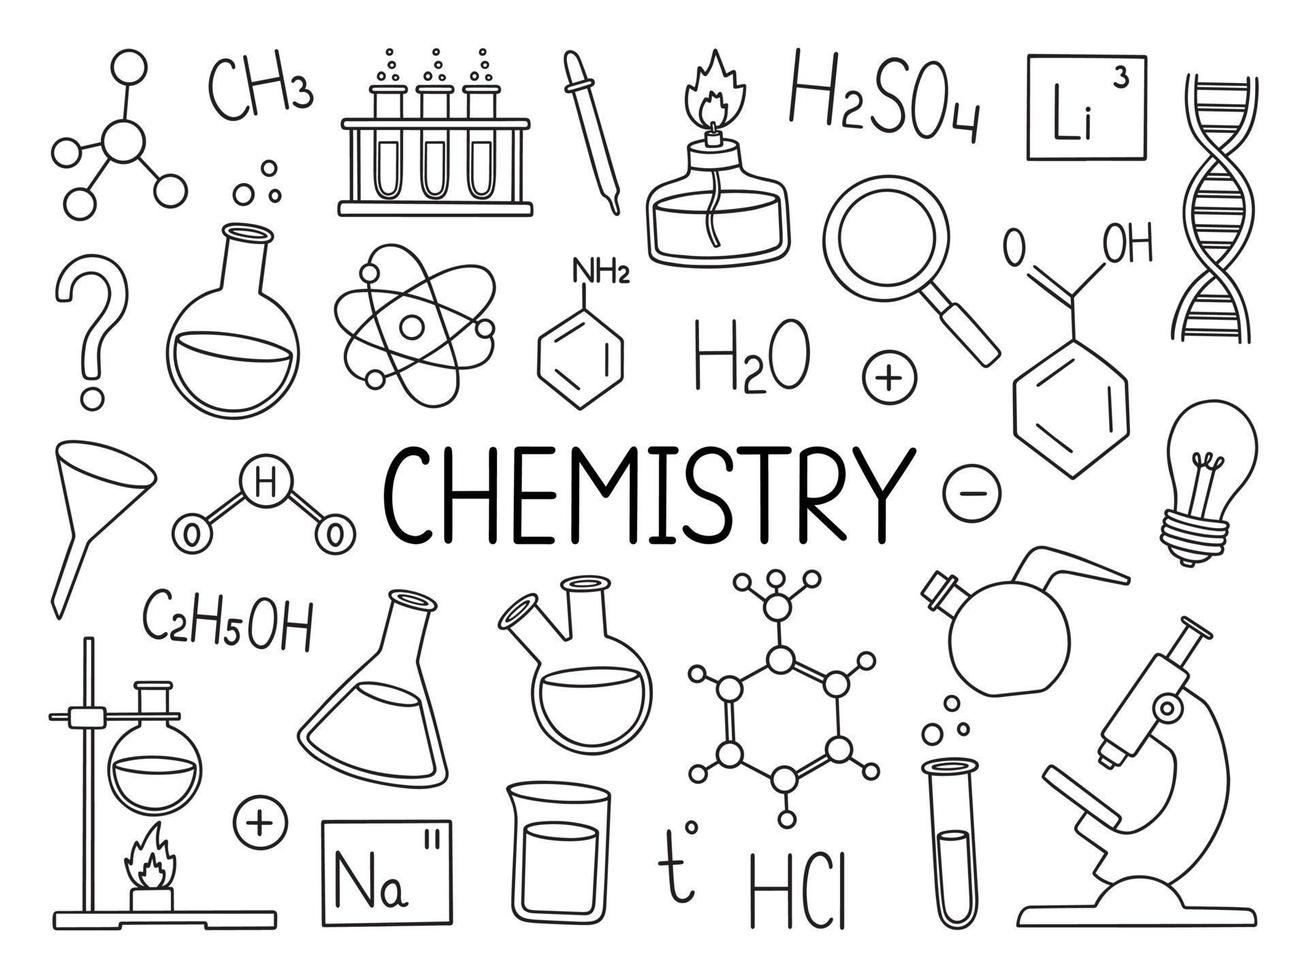 Chemistry doodle set. Chemical laboratory equipment in sketch style. Flasks, formulas, microscope, burner Hand drawn vector illustration isolated on white background